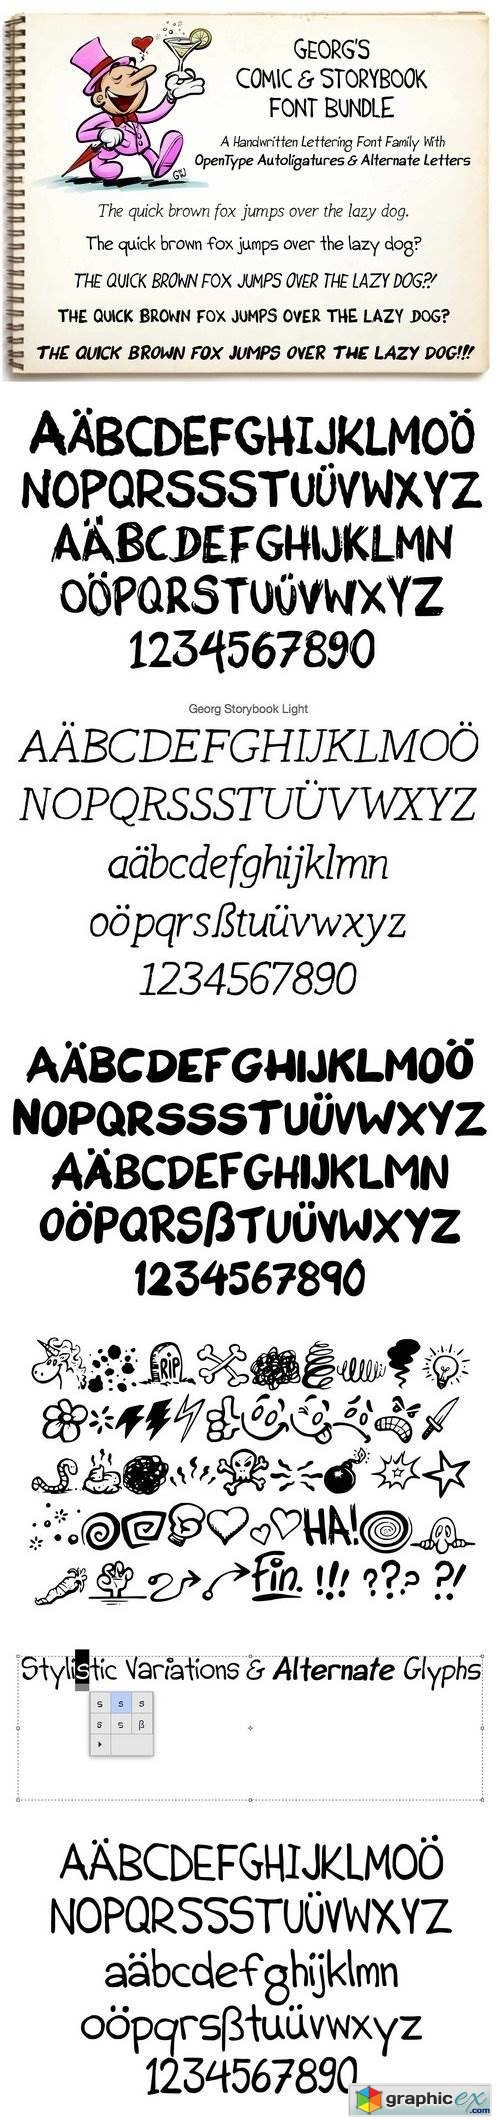 11+ FONTS for Comics & Storyboards